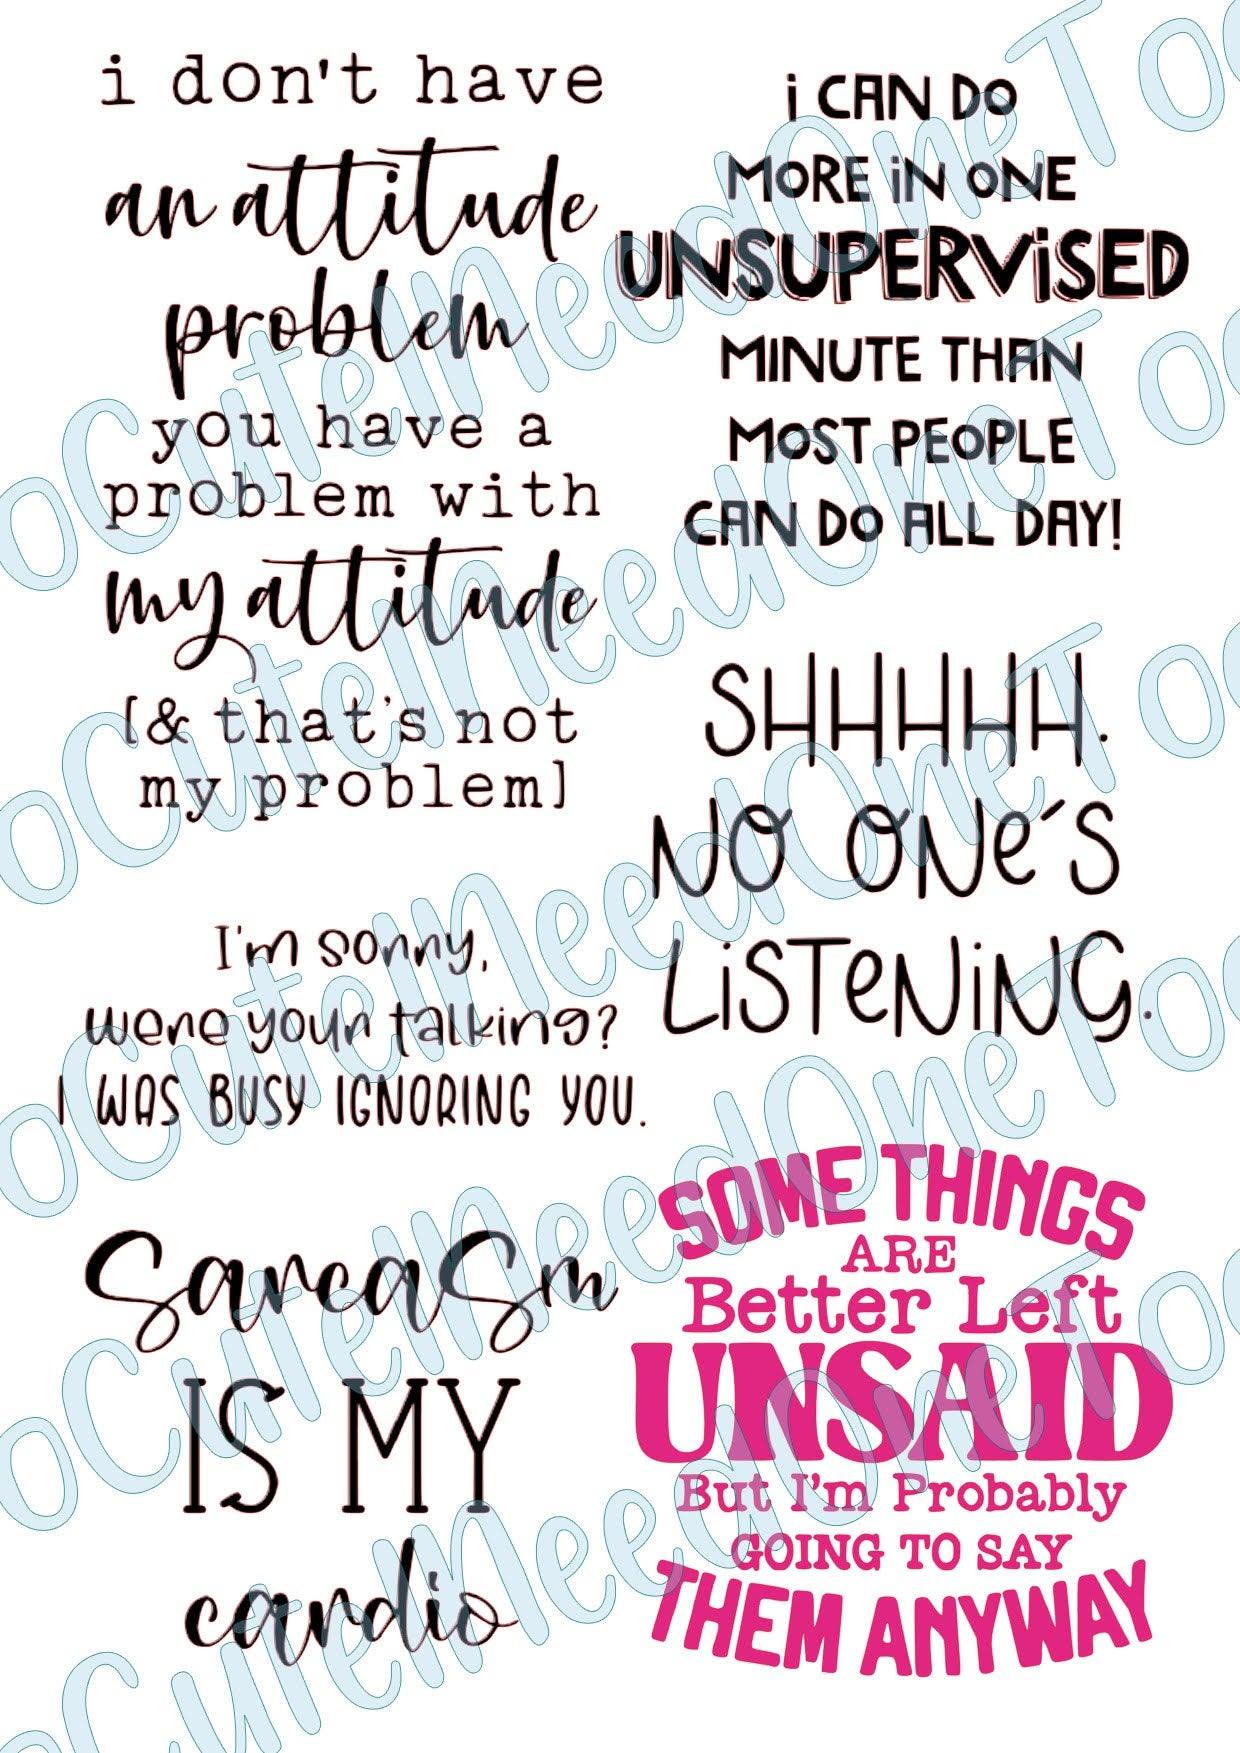 Adult Sayings - I Don't Have an Attitude Decals - SoCuteINeedOneToo